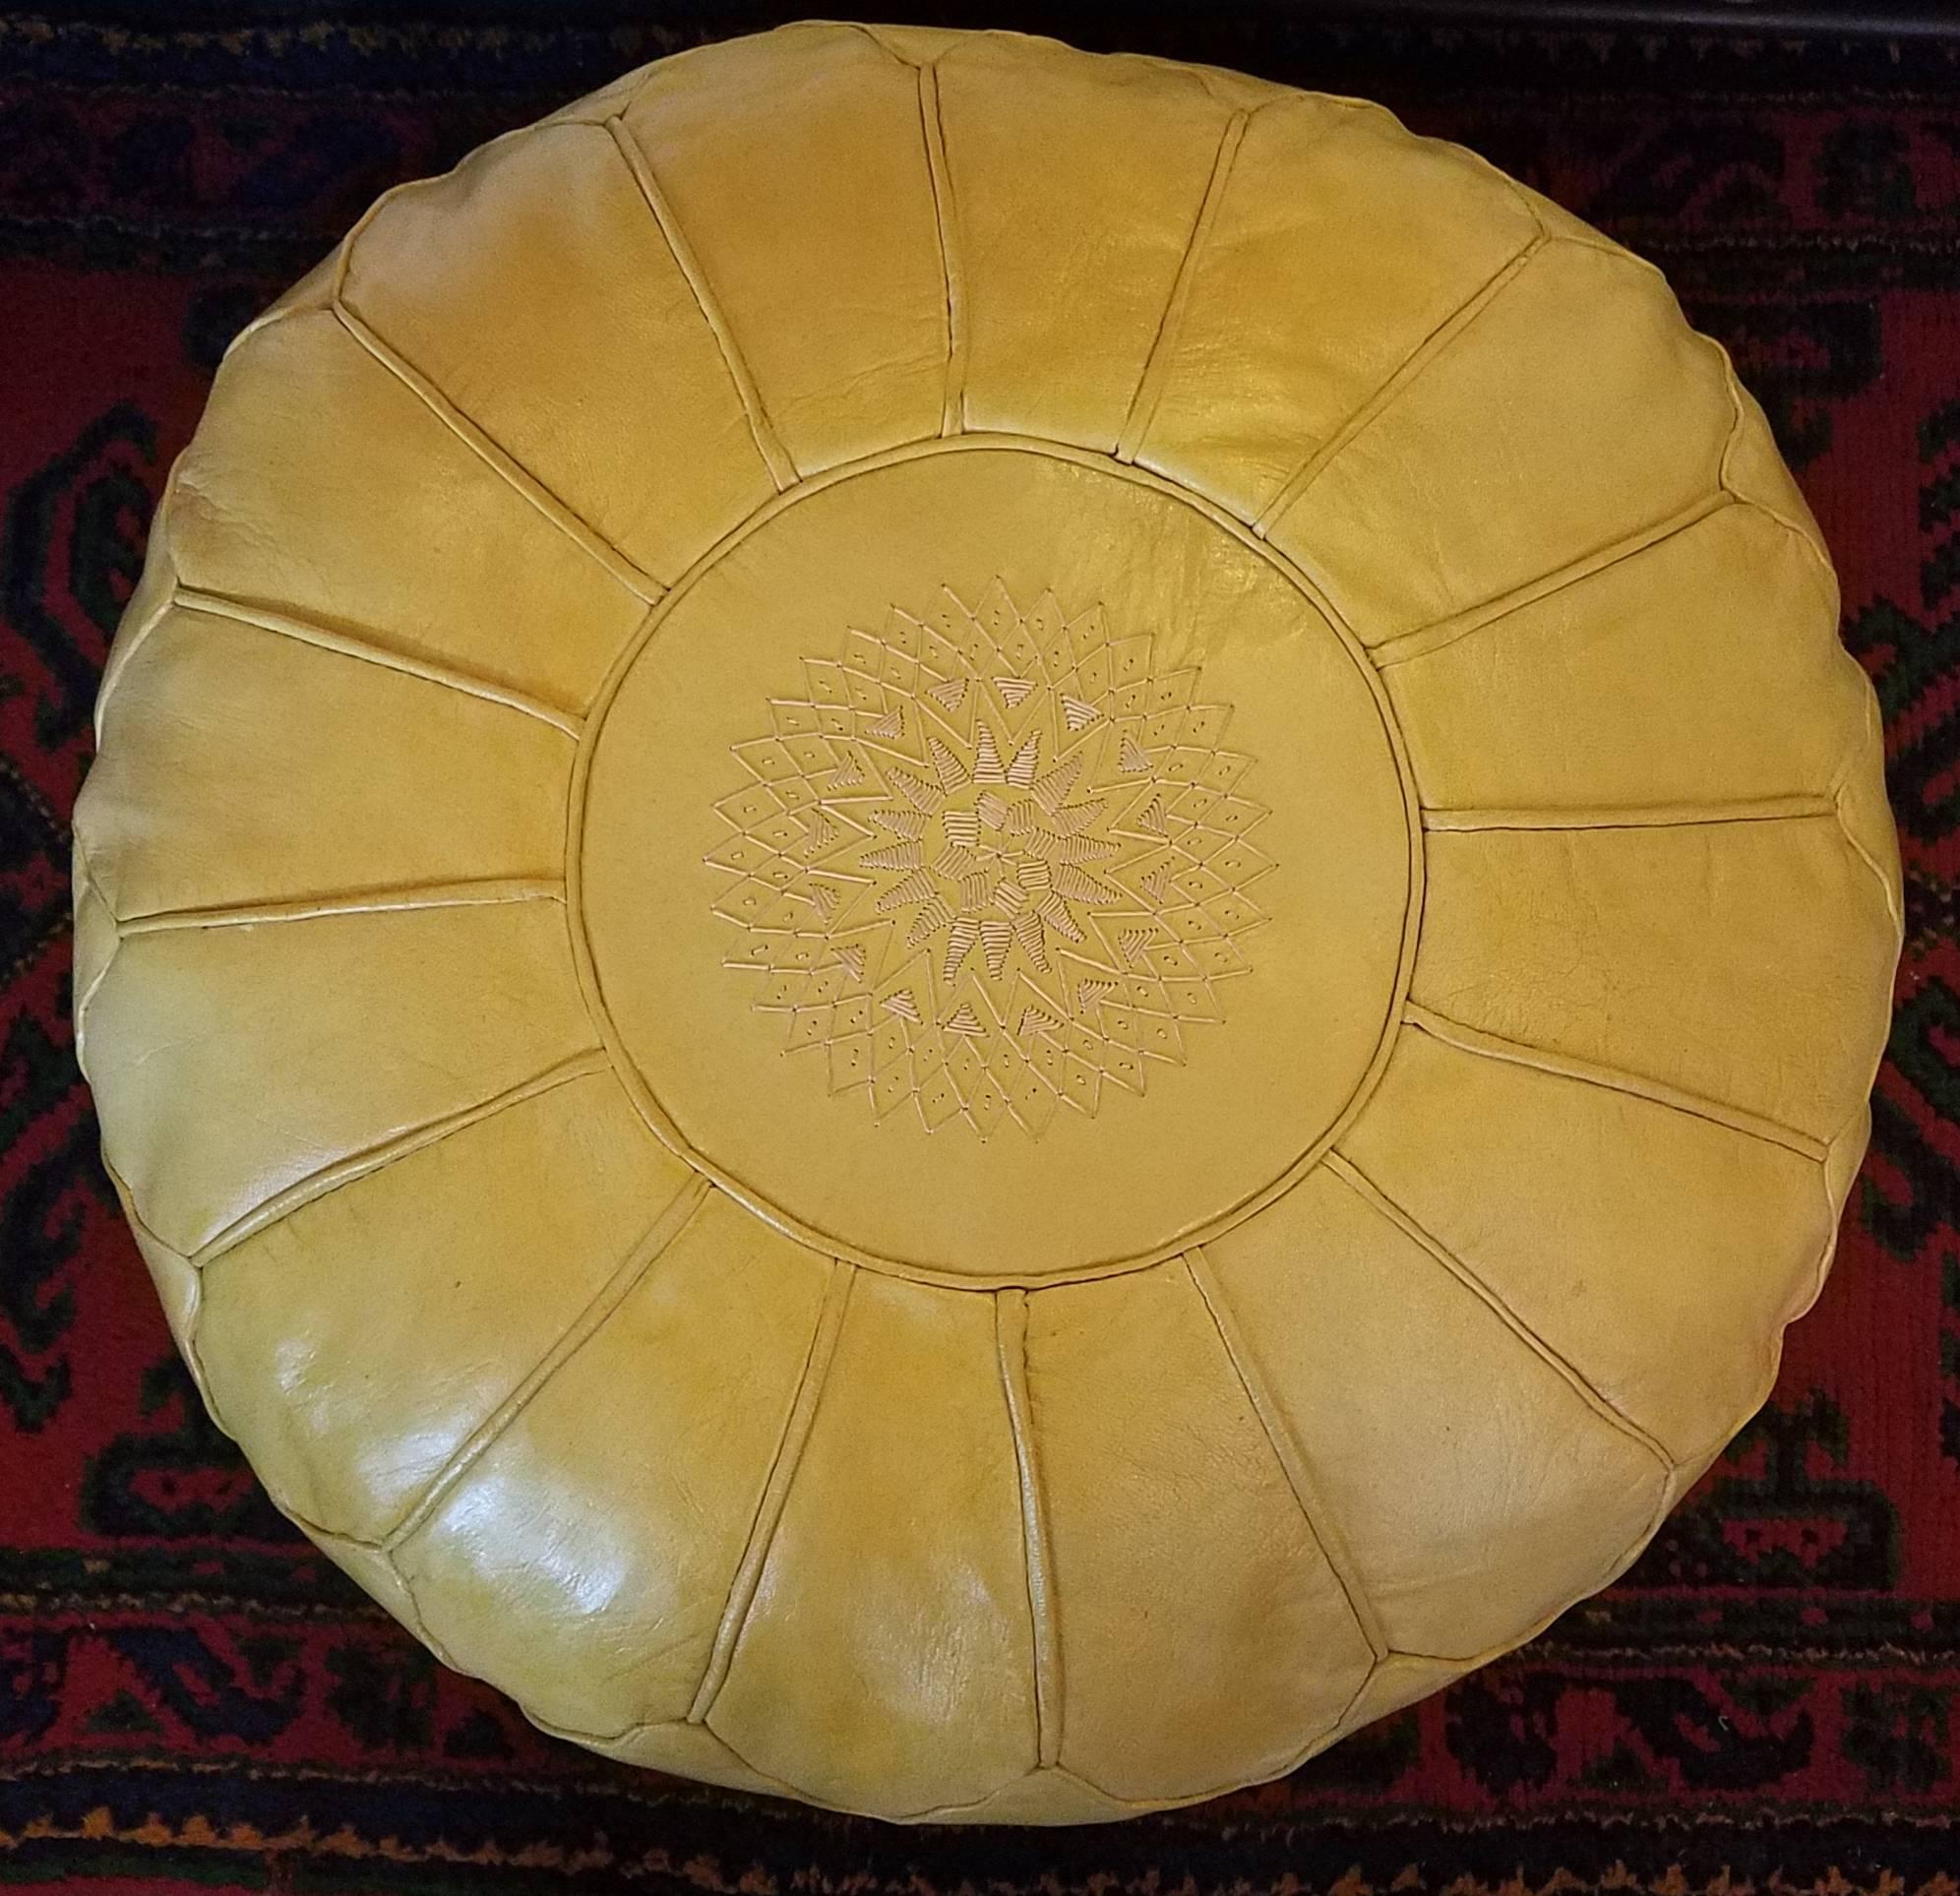 Poufs and ottomans have been around for a very long time, as many cultures prefer low seating for meals and family gatherings. We, at Living Morocco, carry a wide variety of leather poufs and ottomans, fabric hassocks, and leather camel